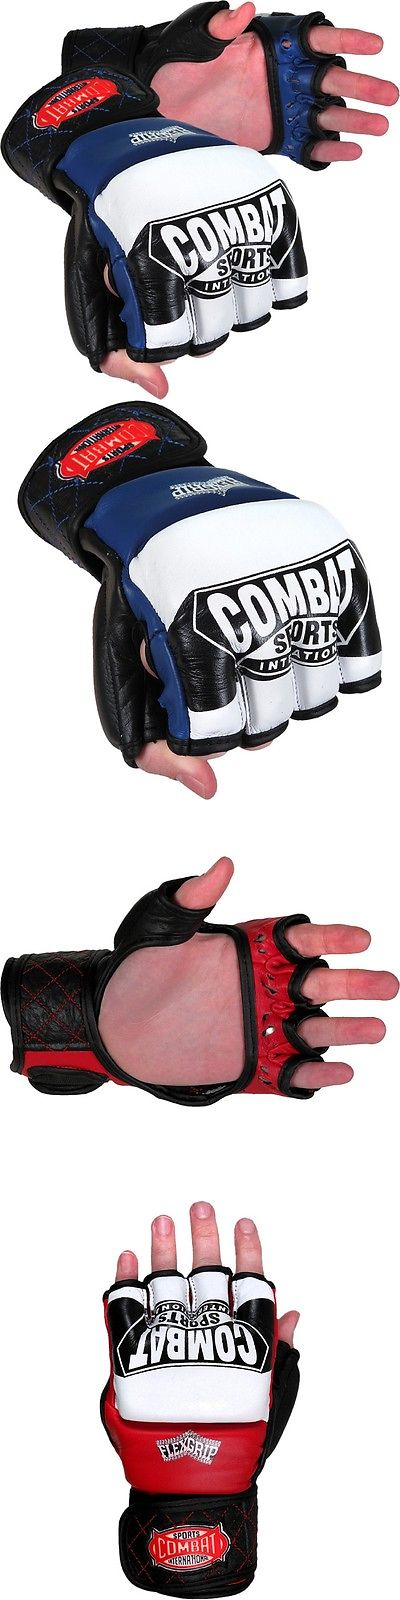 best of Gloves Combat competition sports amateur mma